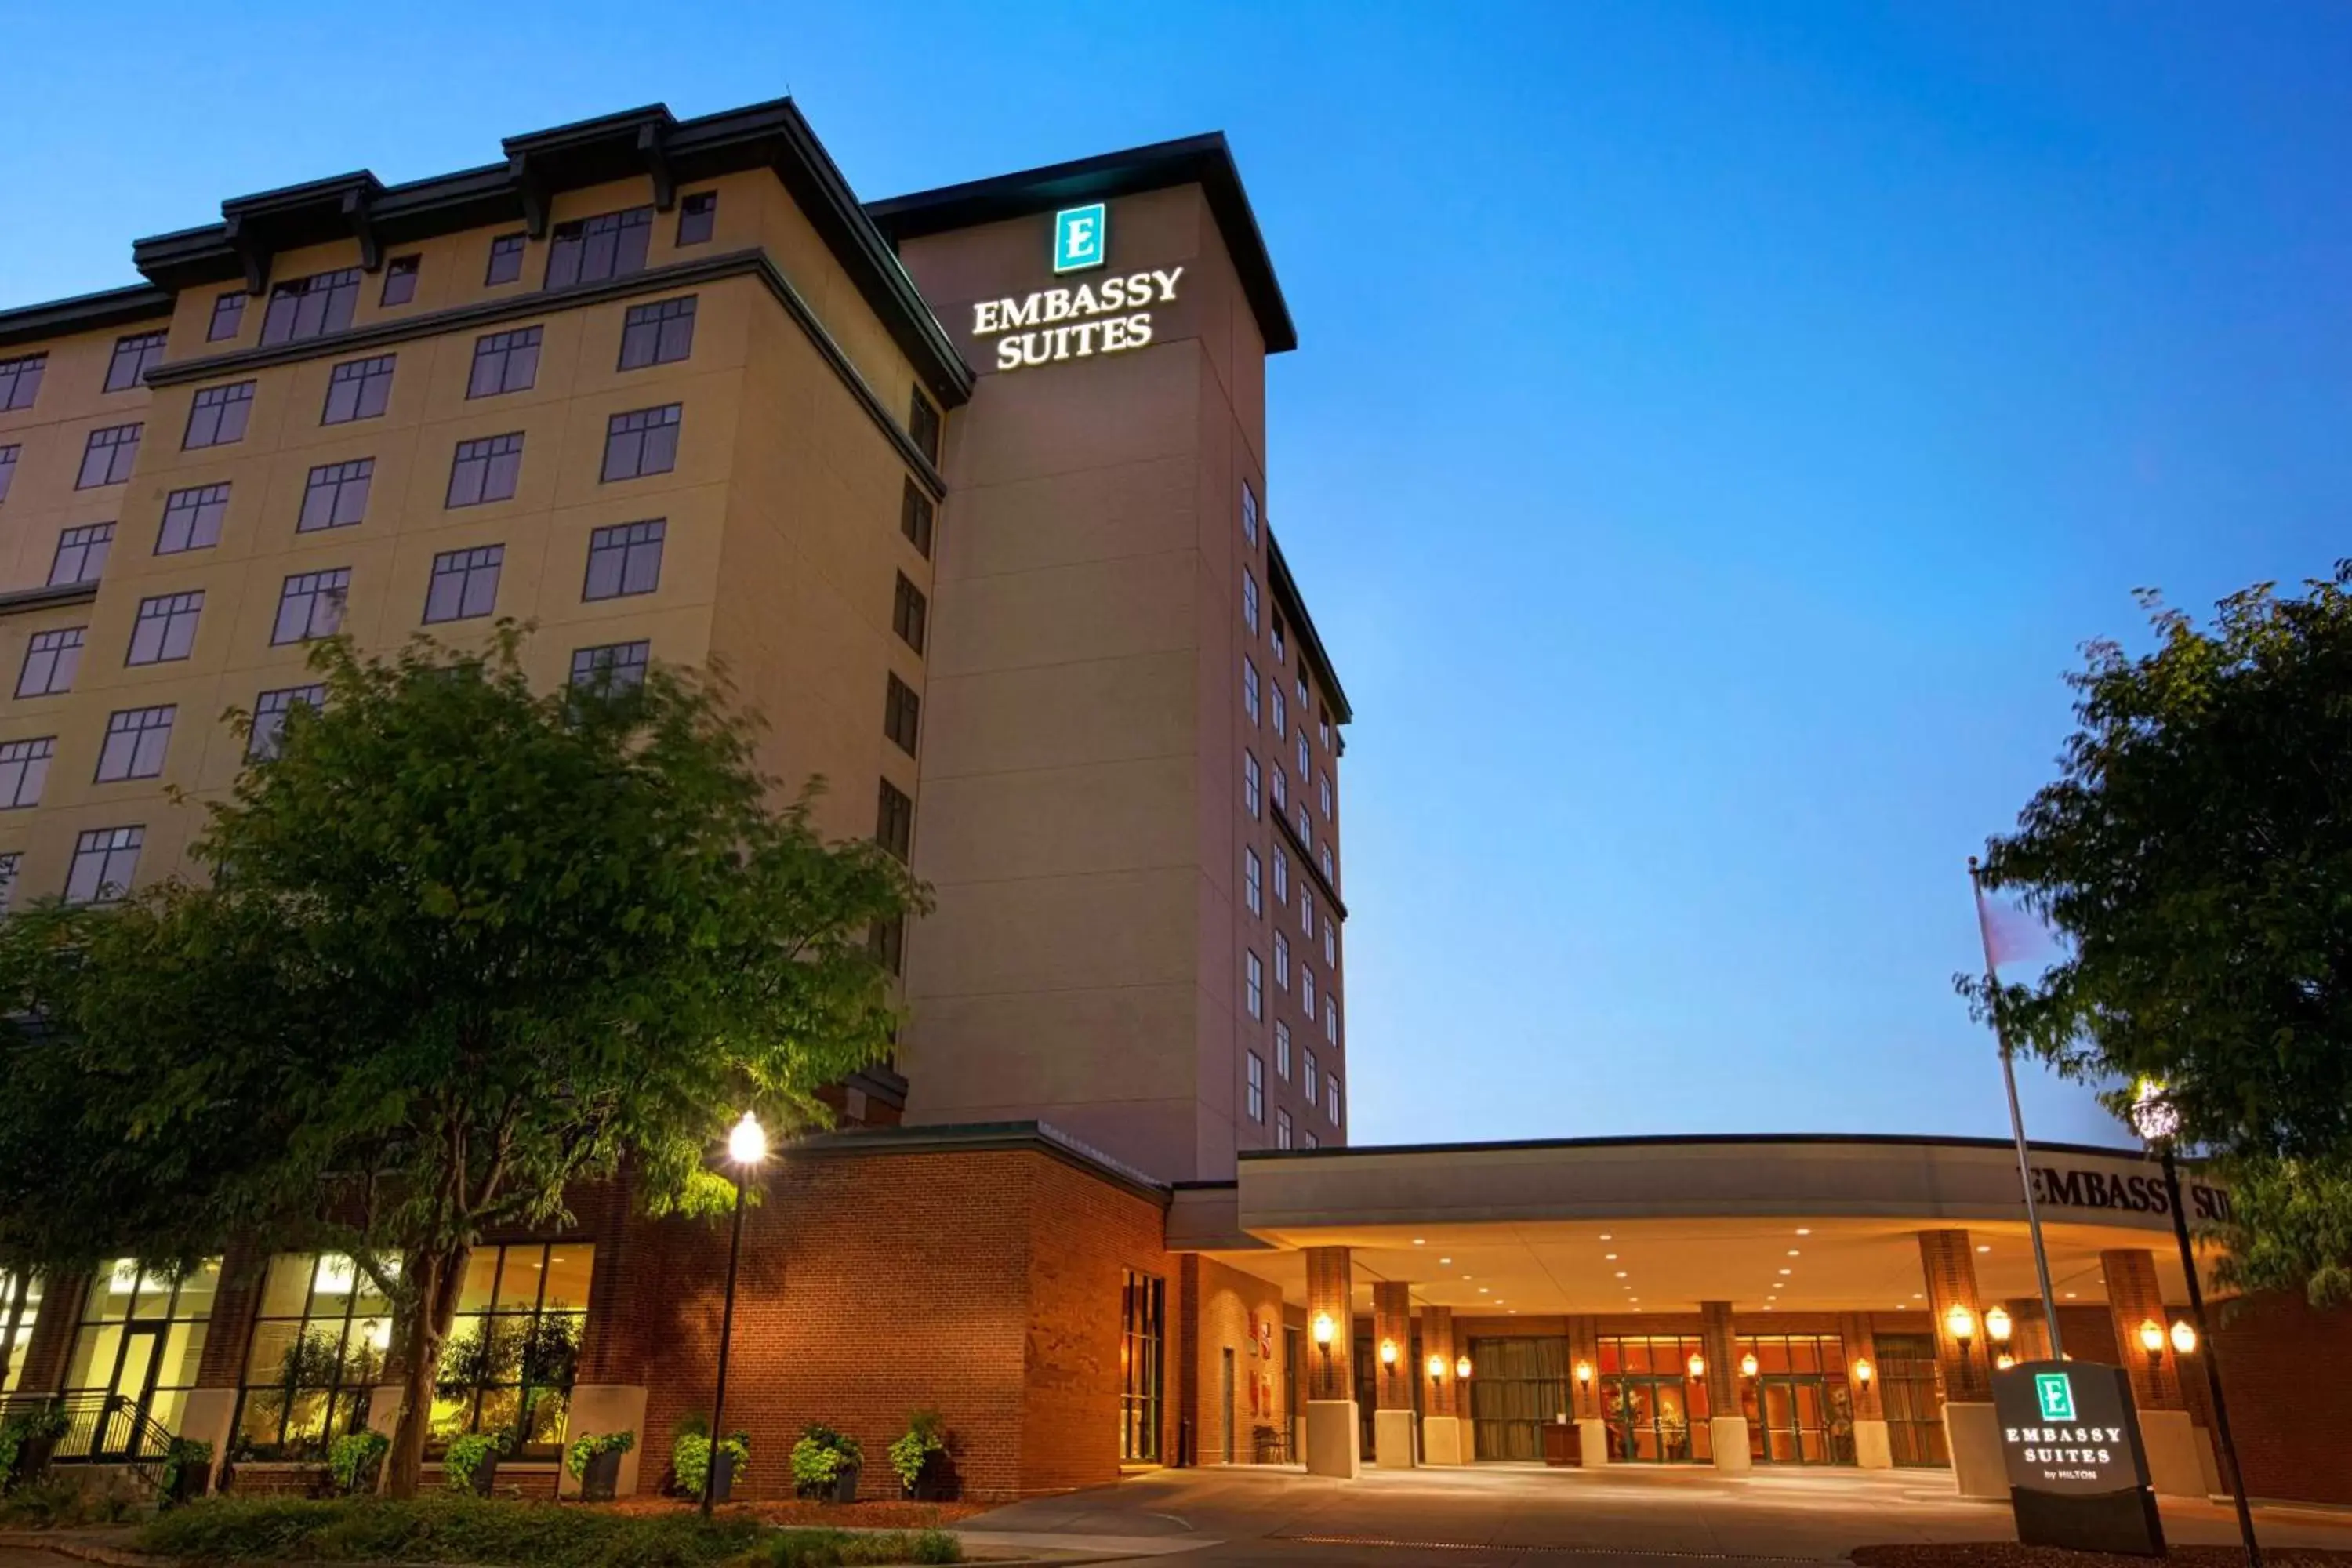 Property Building in Embassy Suites Lincoln